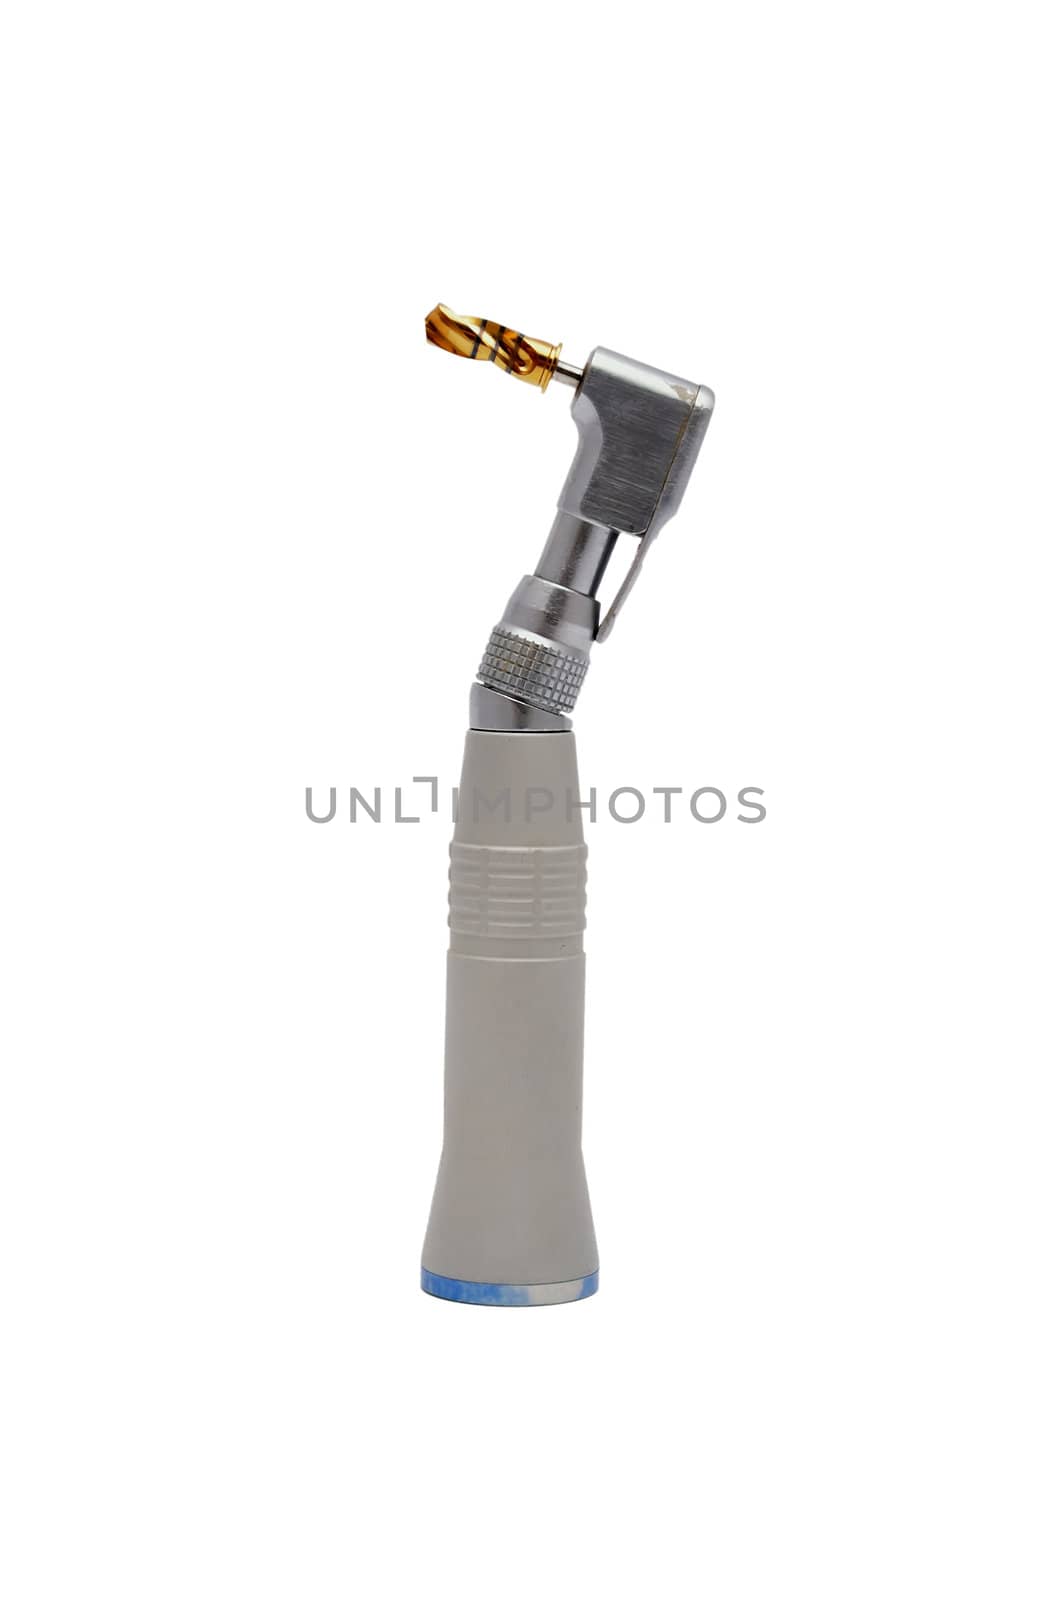 dental drill on a white background